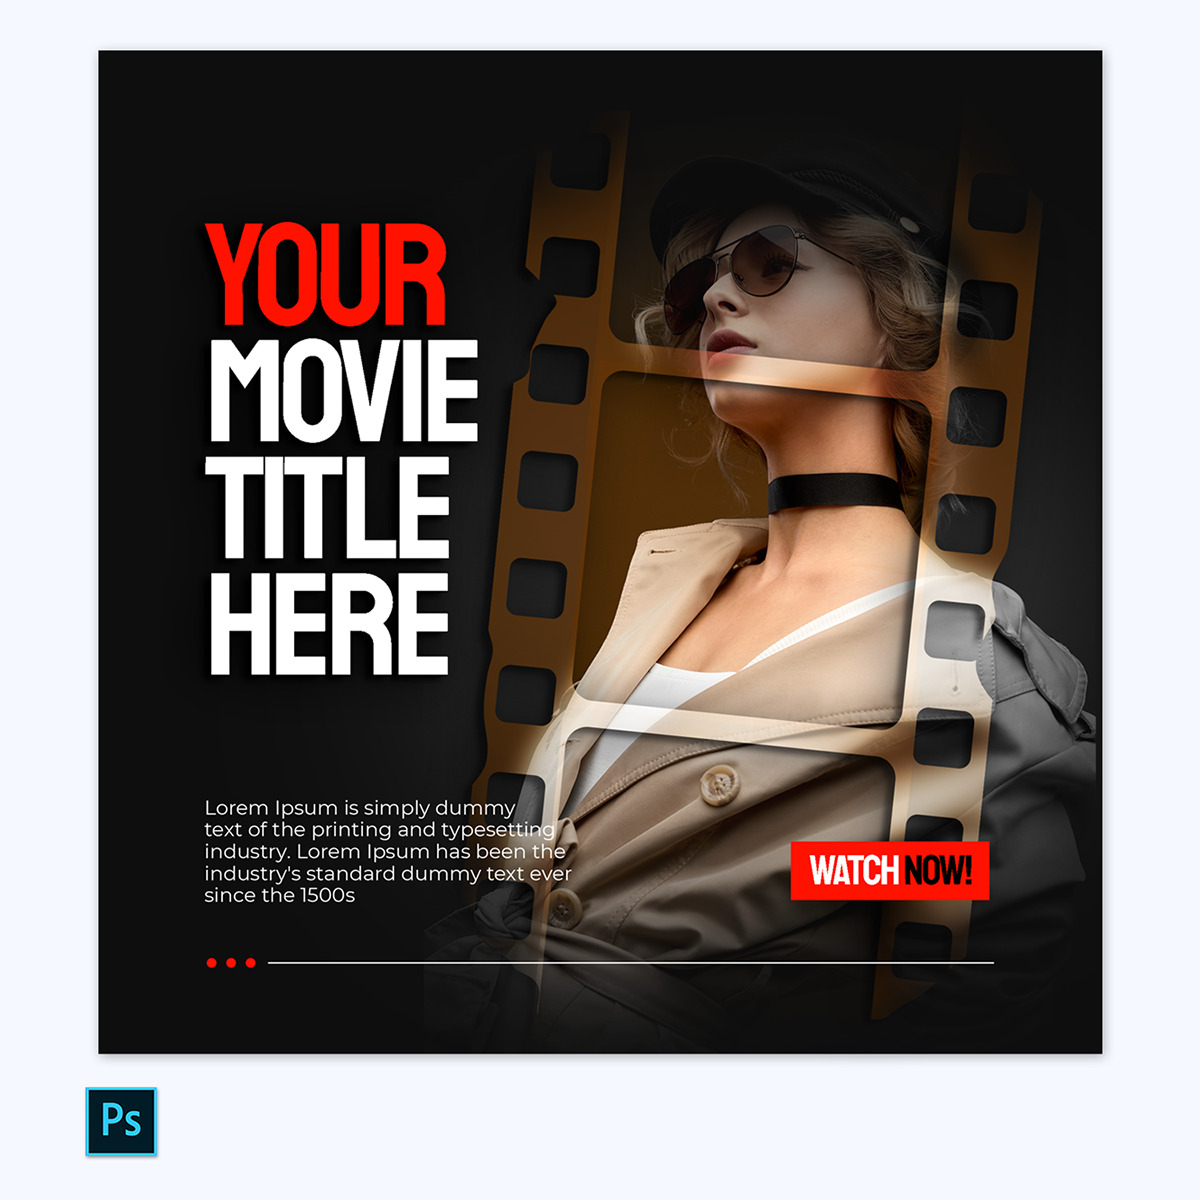 Printable Movie Poster Template 02 in Photoshop